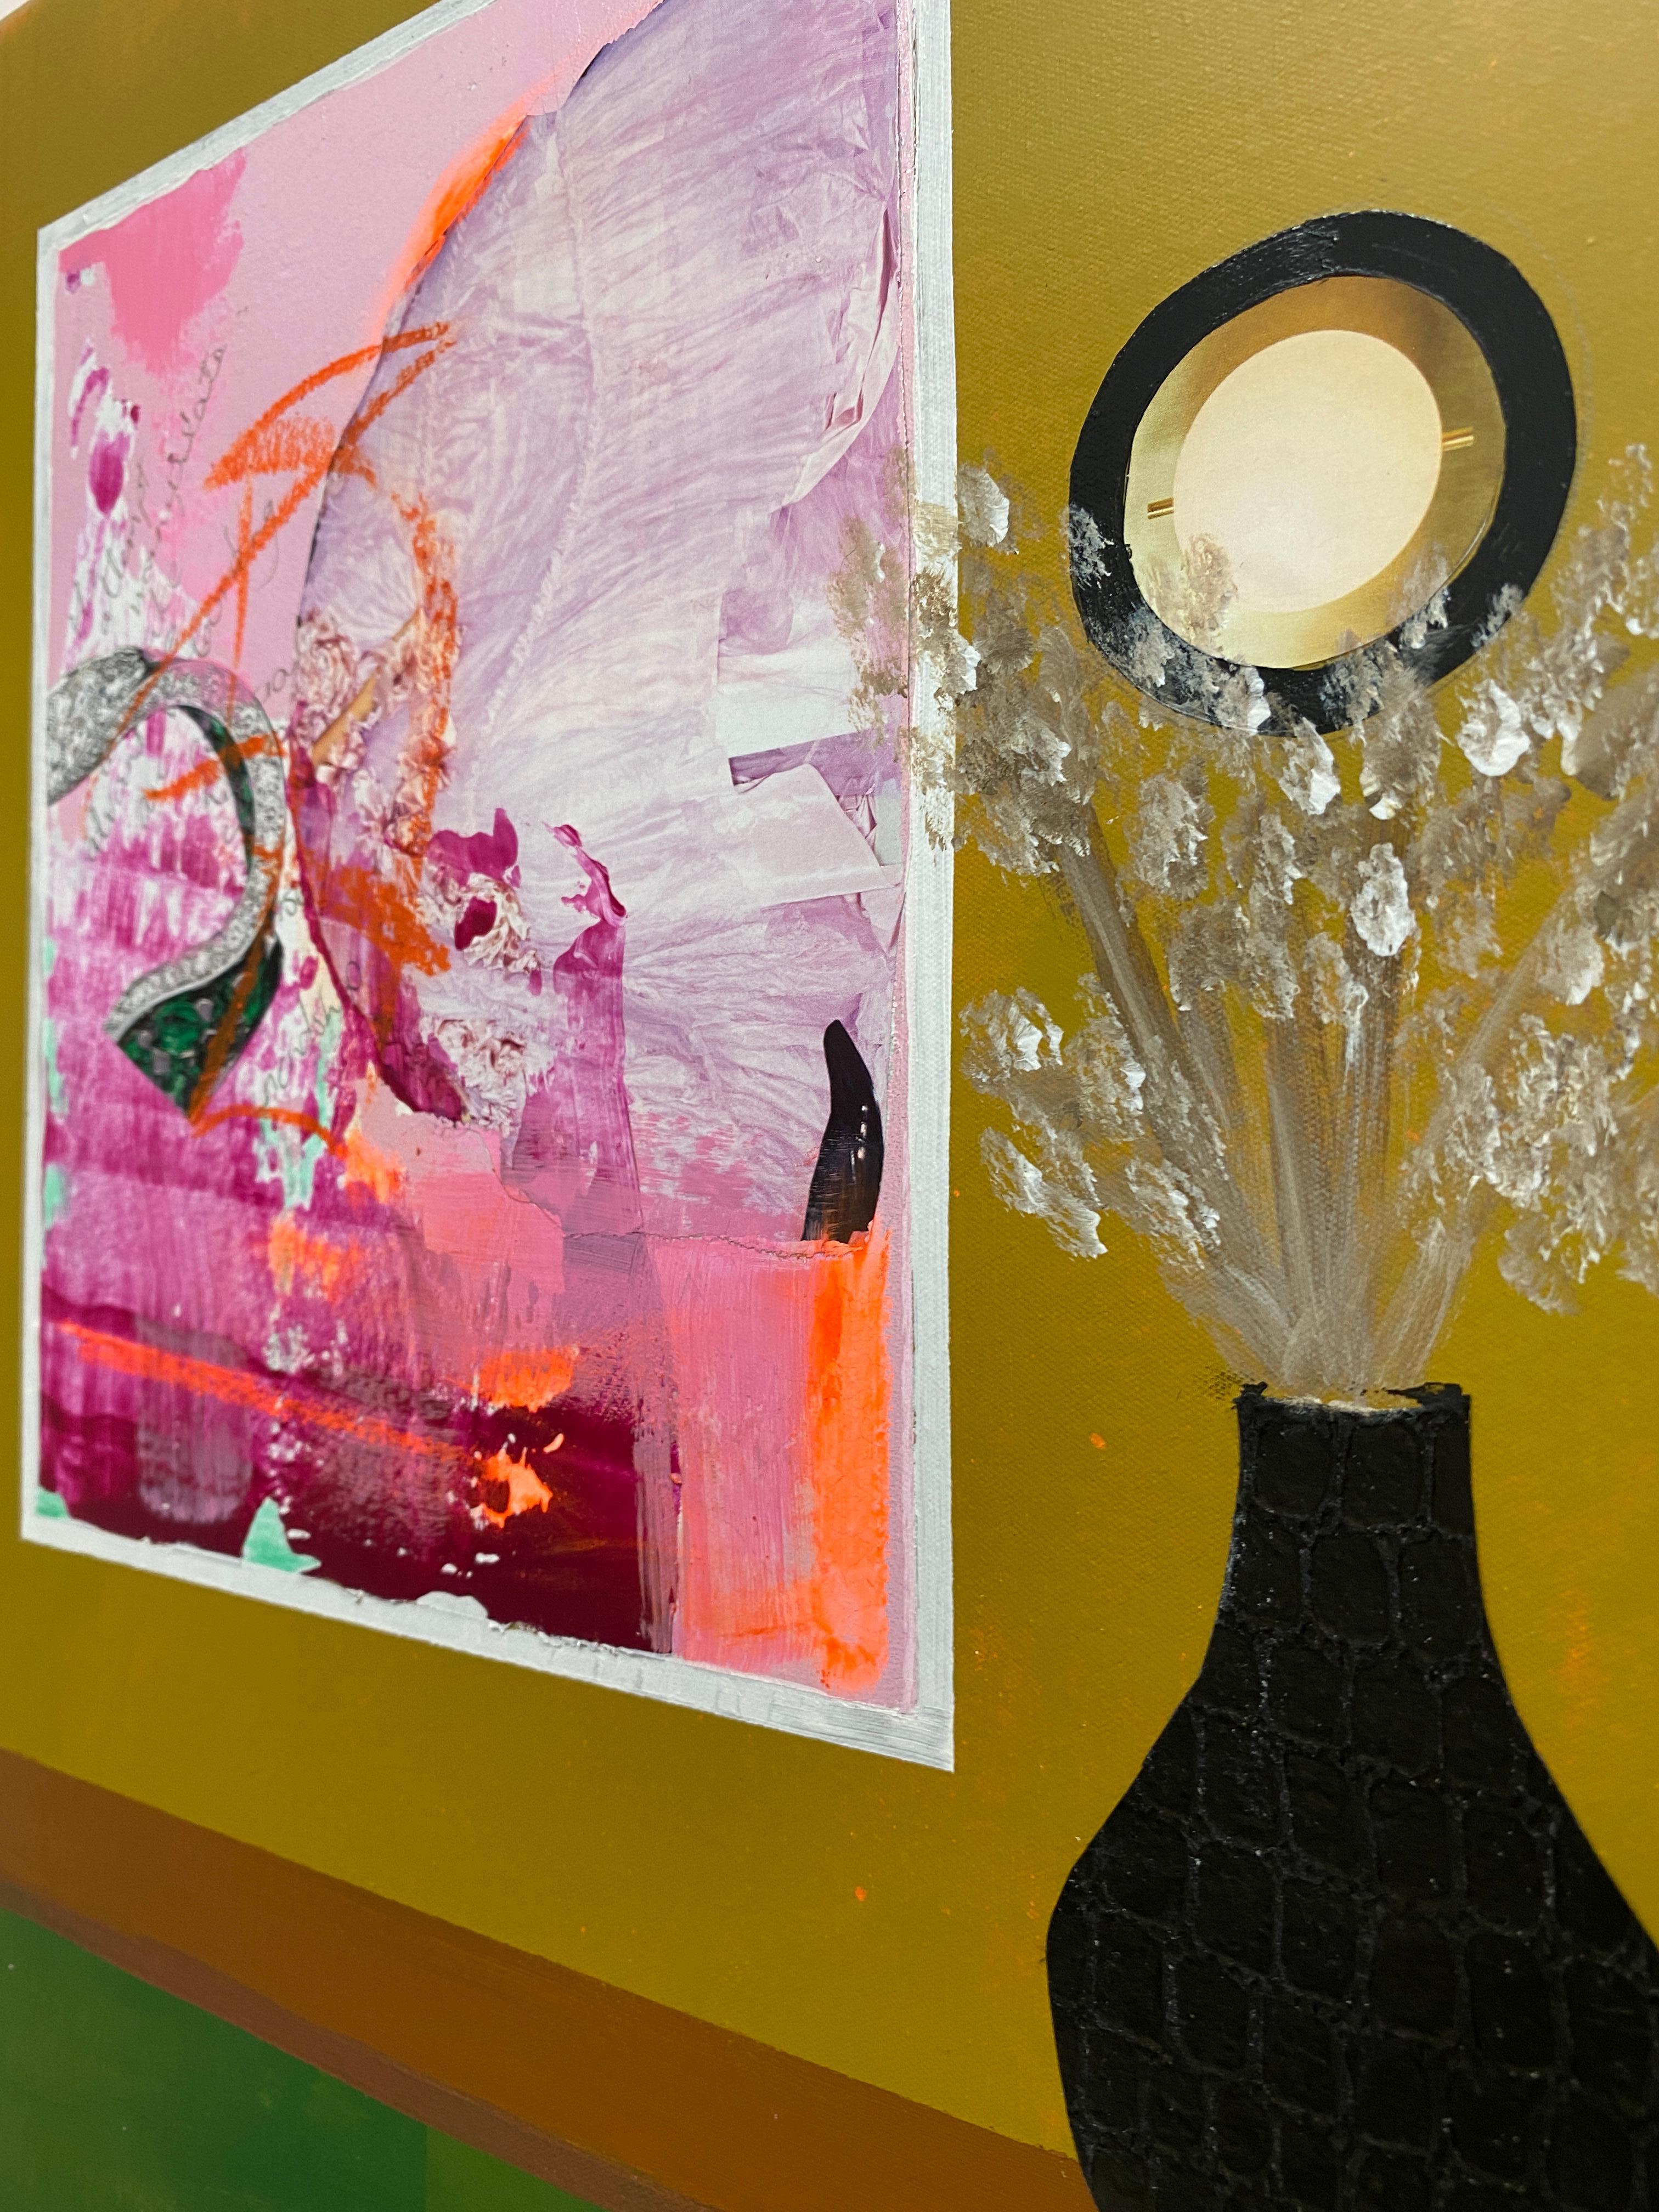 The artworks presented capture the essence and interconnectivity of life, the delicate interplay of form in space and moments captured in time.

Vibrant colours and texture adorn the surfaces of each artists’ compositions. Dawn Beckles’ use of